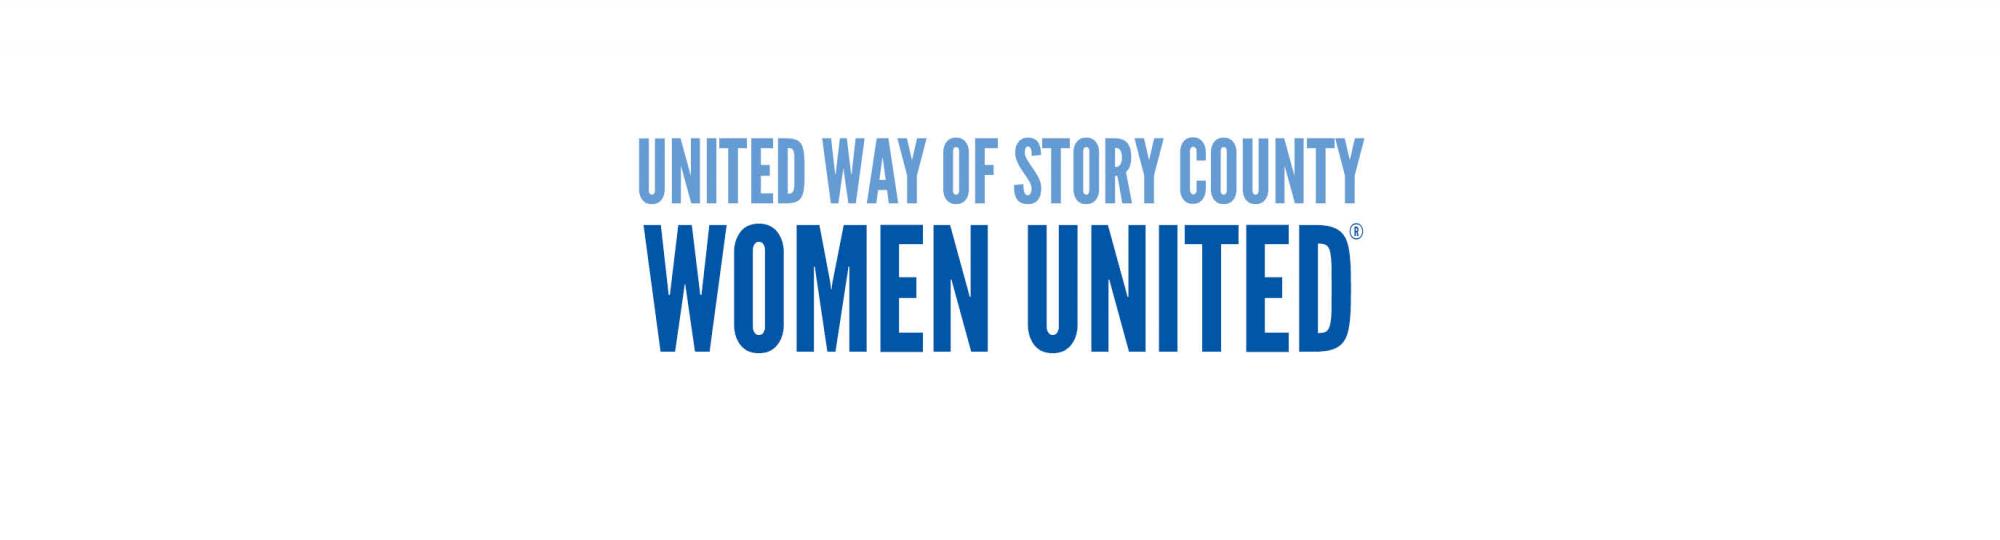 United Way of Story County Women United